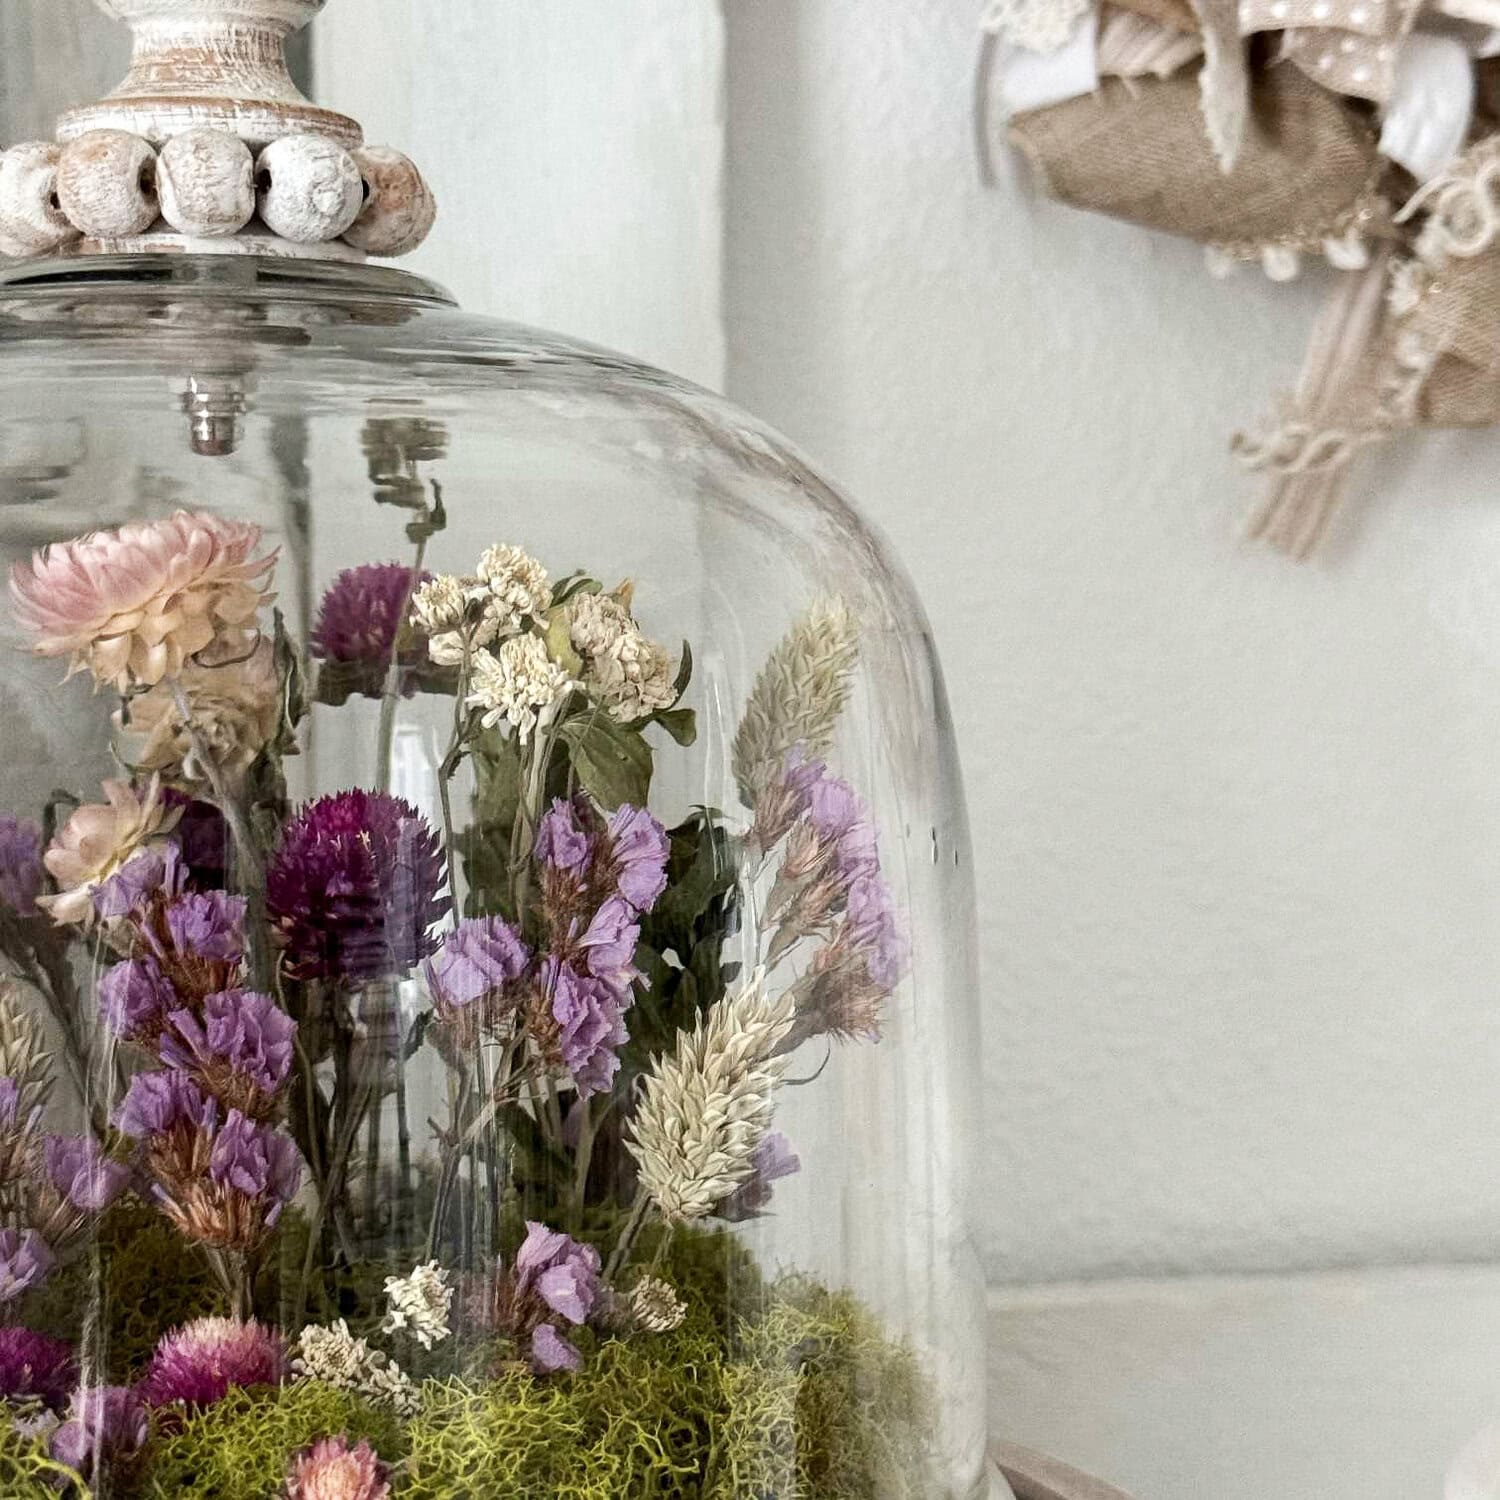 Dried flowers in a cloche